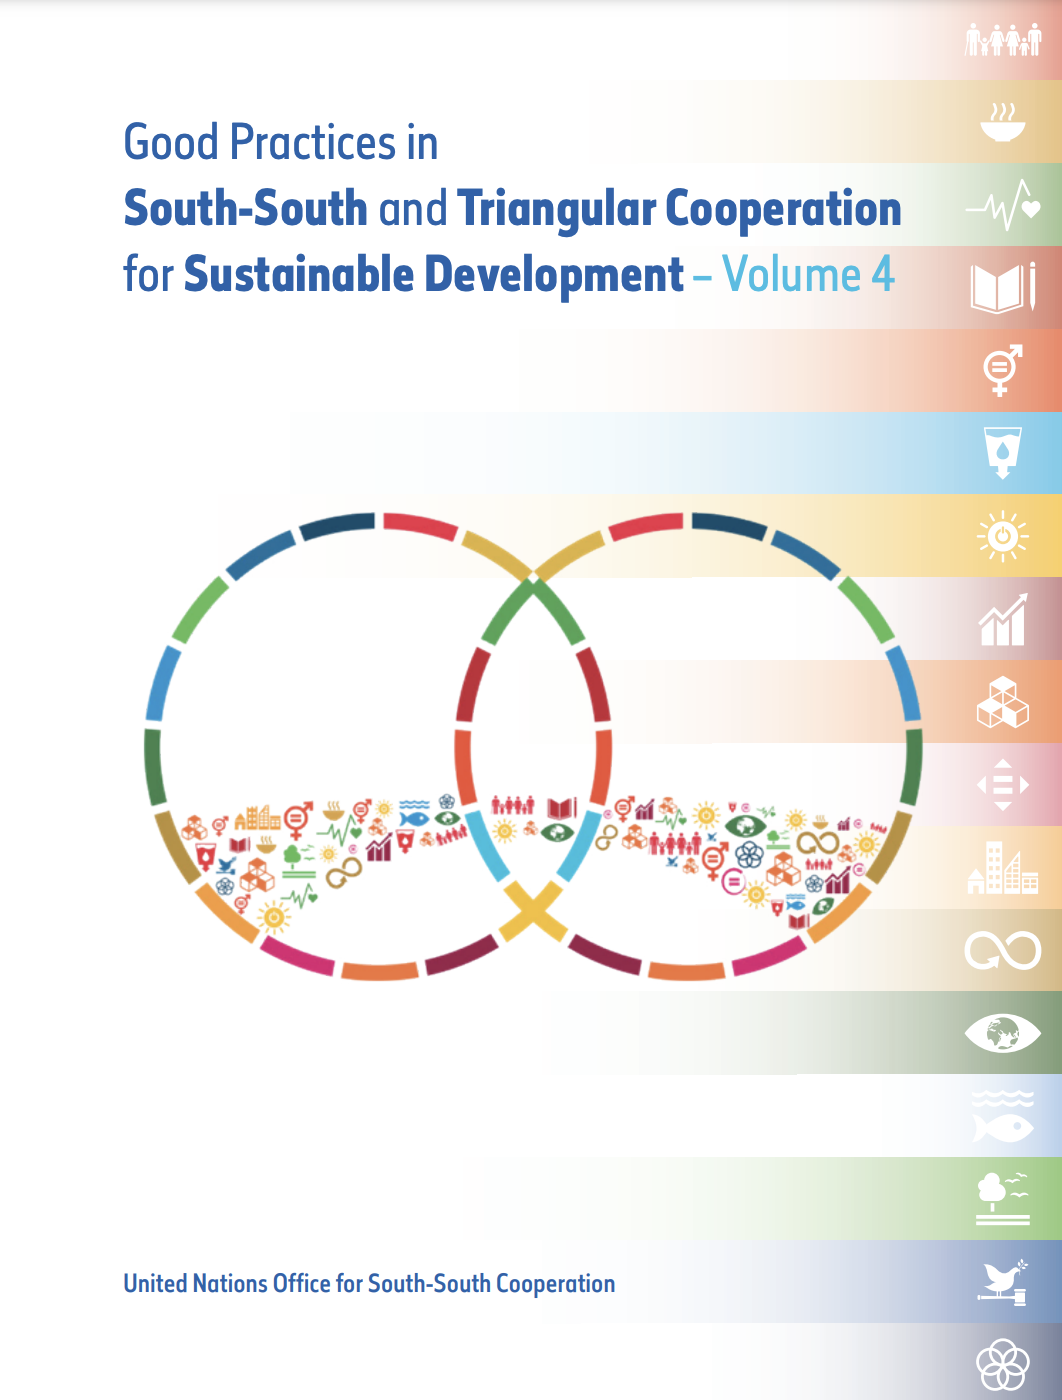 Good Practices in South-South and Triangular Cooperation for Sustainable Development – Vol. 4